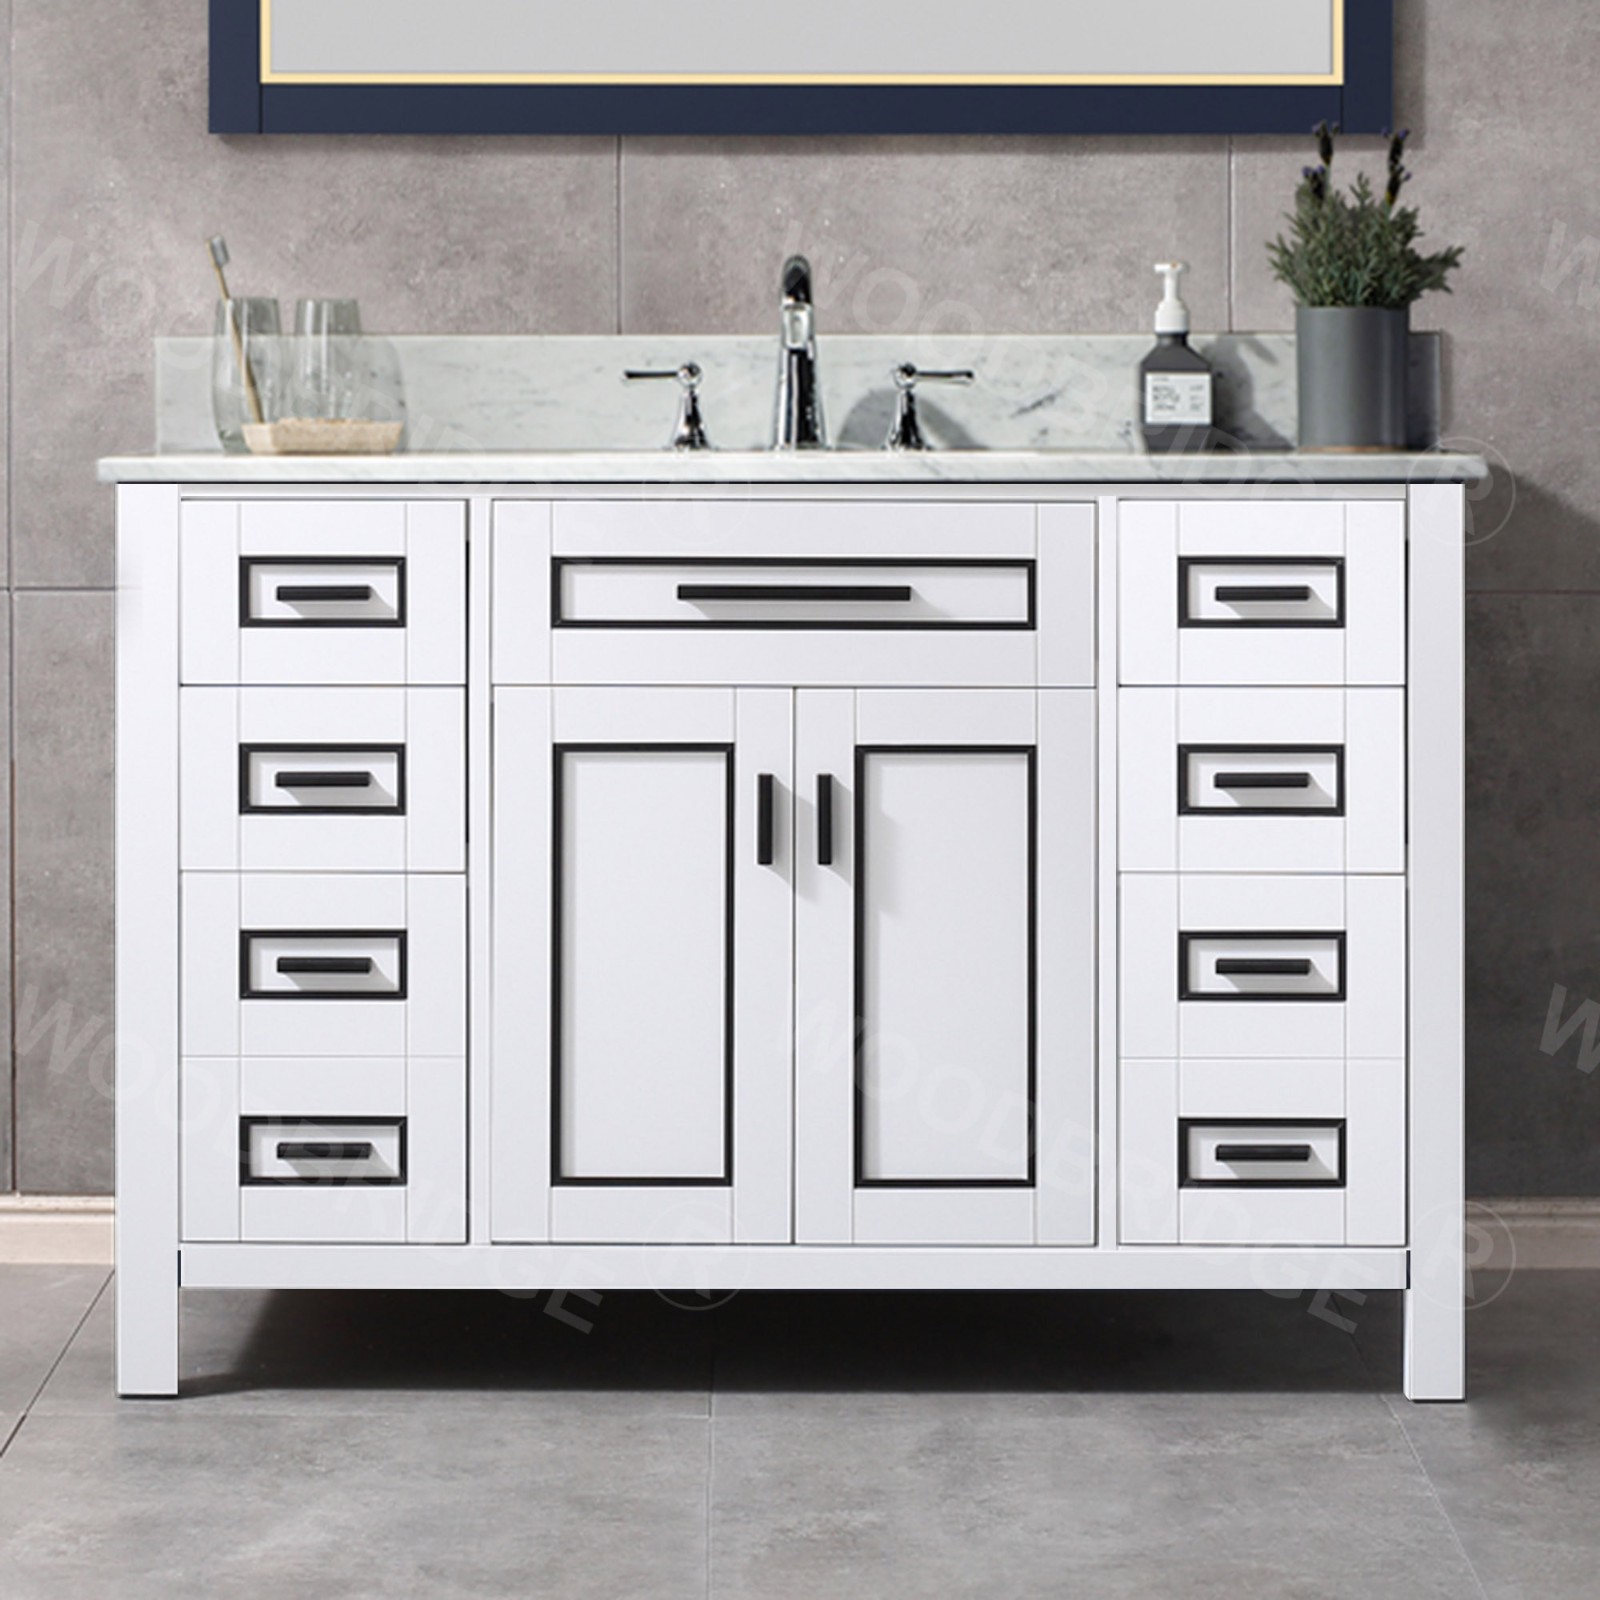  WOODBRIDGE Milan  49” Floor Mounted Single Basin Vanity Set with Solid Wood Cabinet in White, and Carrara White Marble Vanity Top with Pre-installed Undermount Rectangle Bathroom Sink in White, Pre-Drilled 3-Hole for 4-inch Centerset Faucet_4697